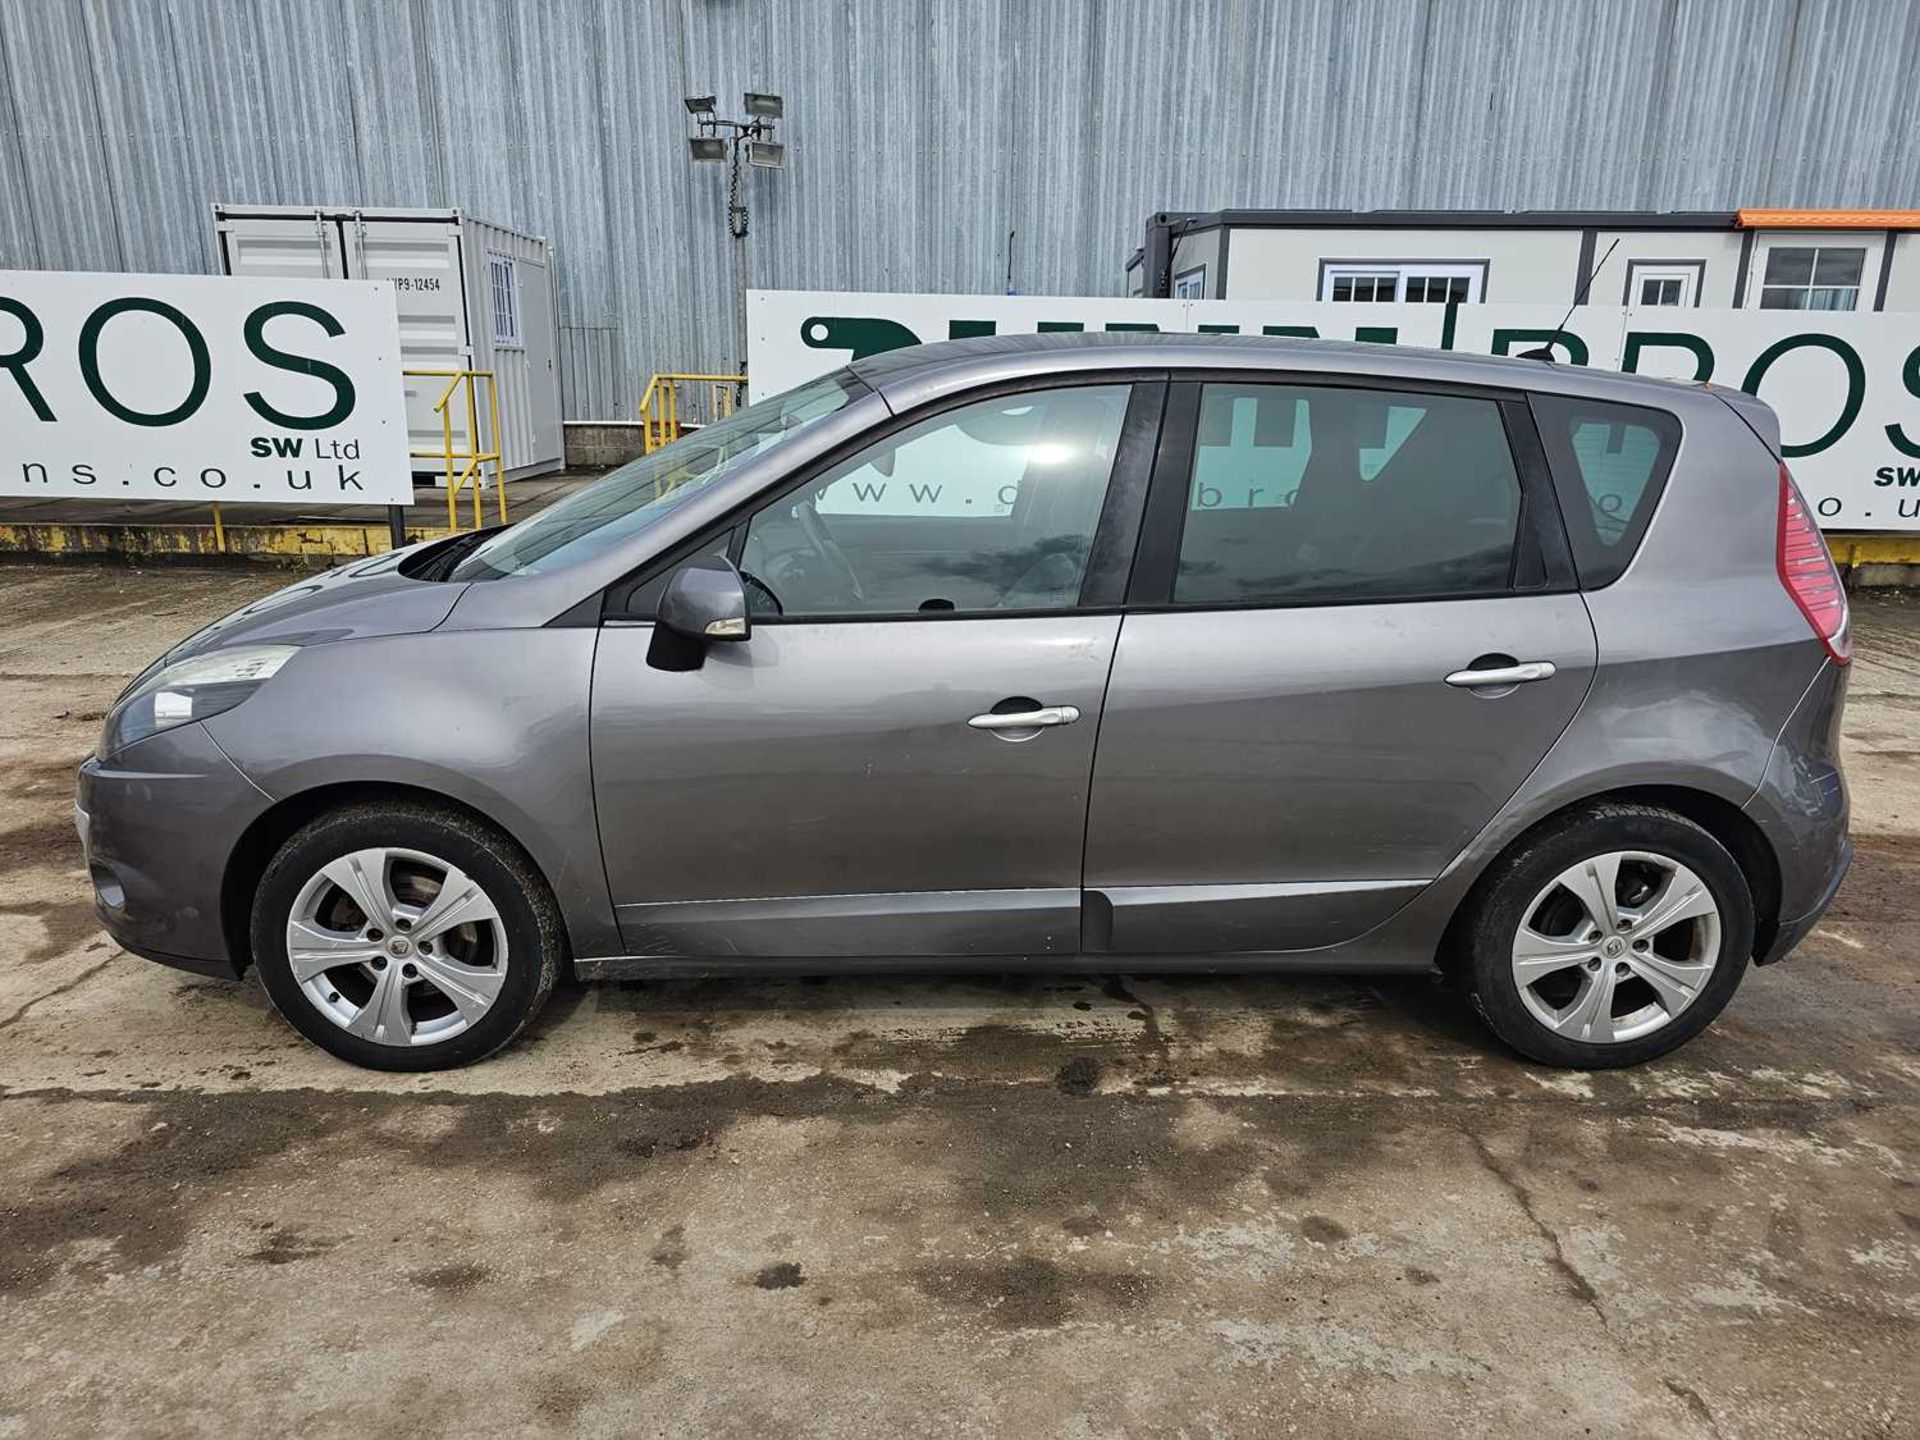 2011 Renault Scenic Dynamique Ttom, 6 Speed, Sat Nav, Bluetooth, Cruise Control, A/C (Reg. Docs. & S - Image 5 of 26